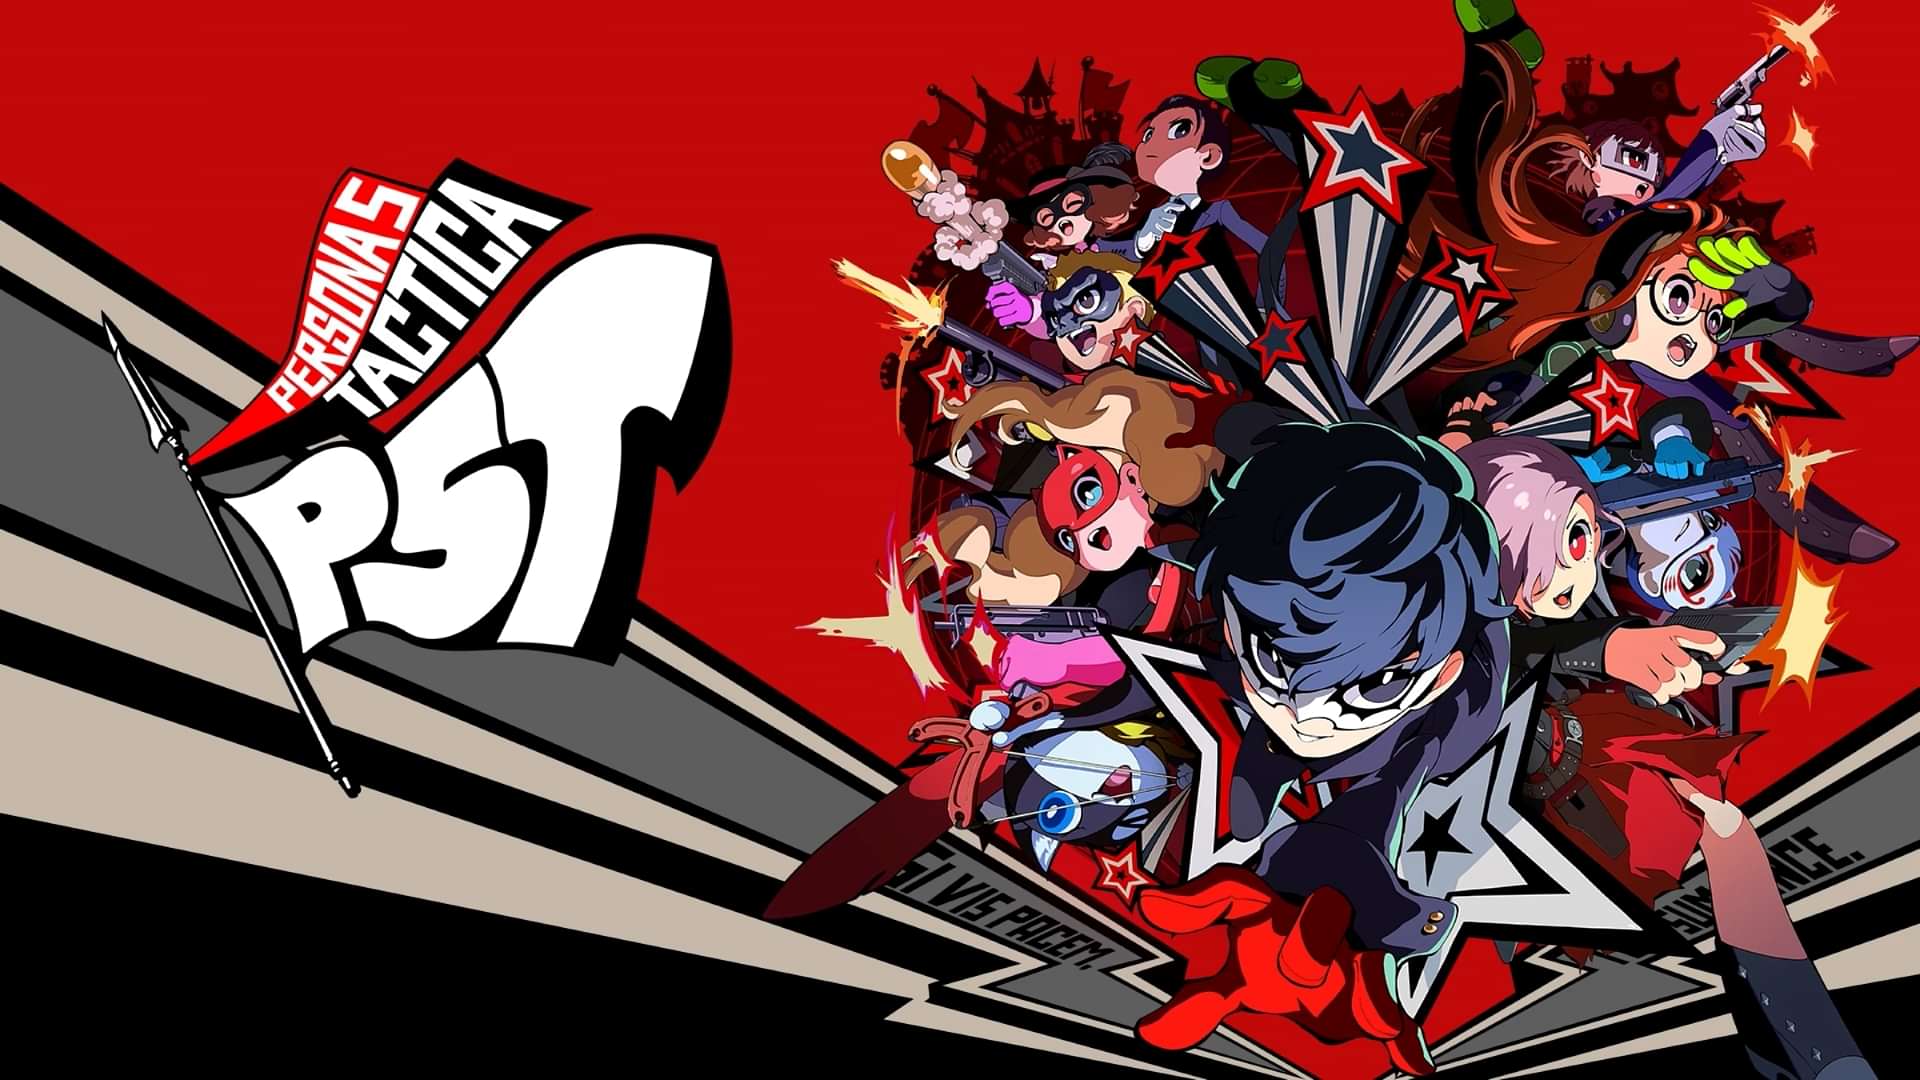 Persona 5 PC is coming in October, and on Game Pass too